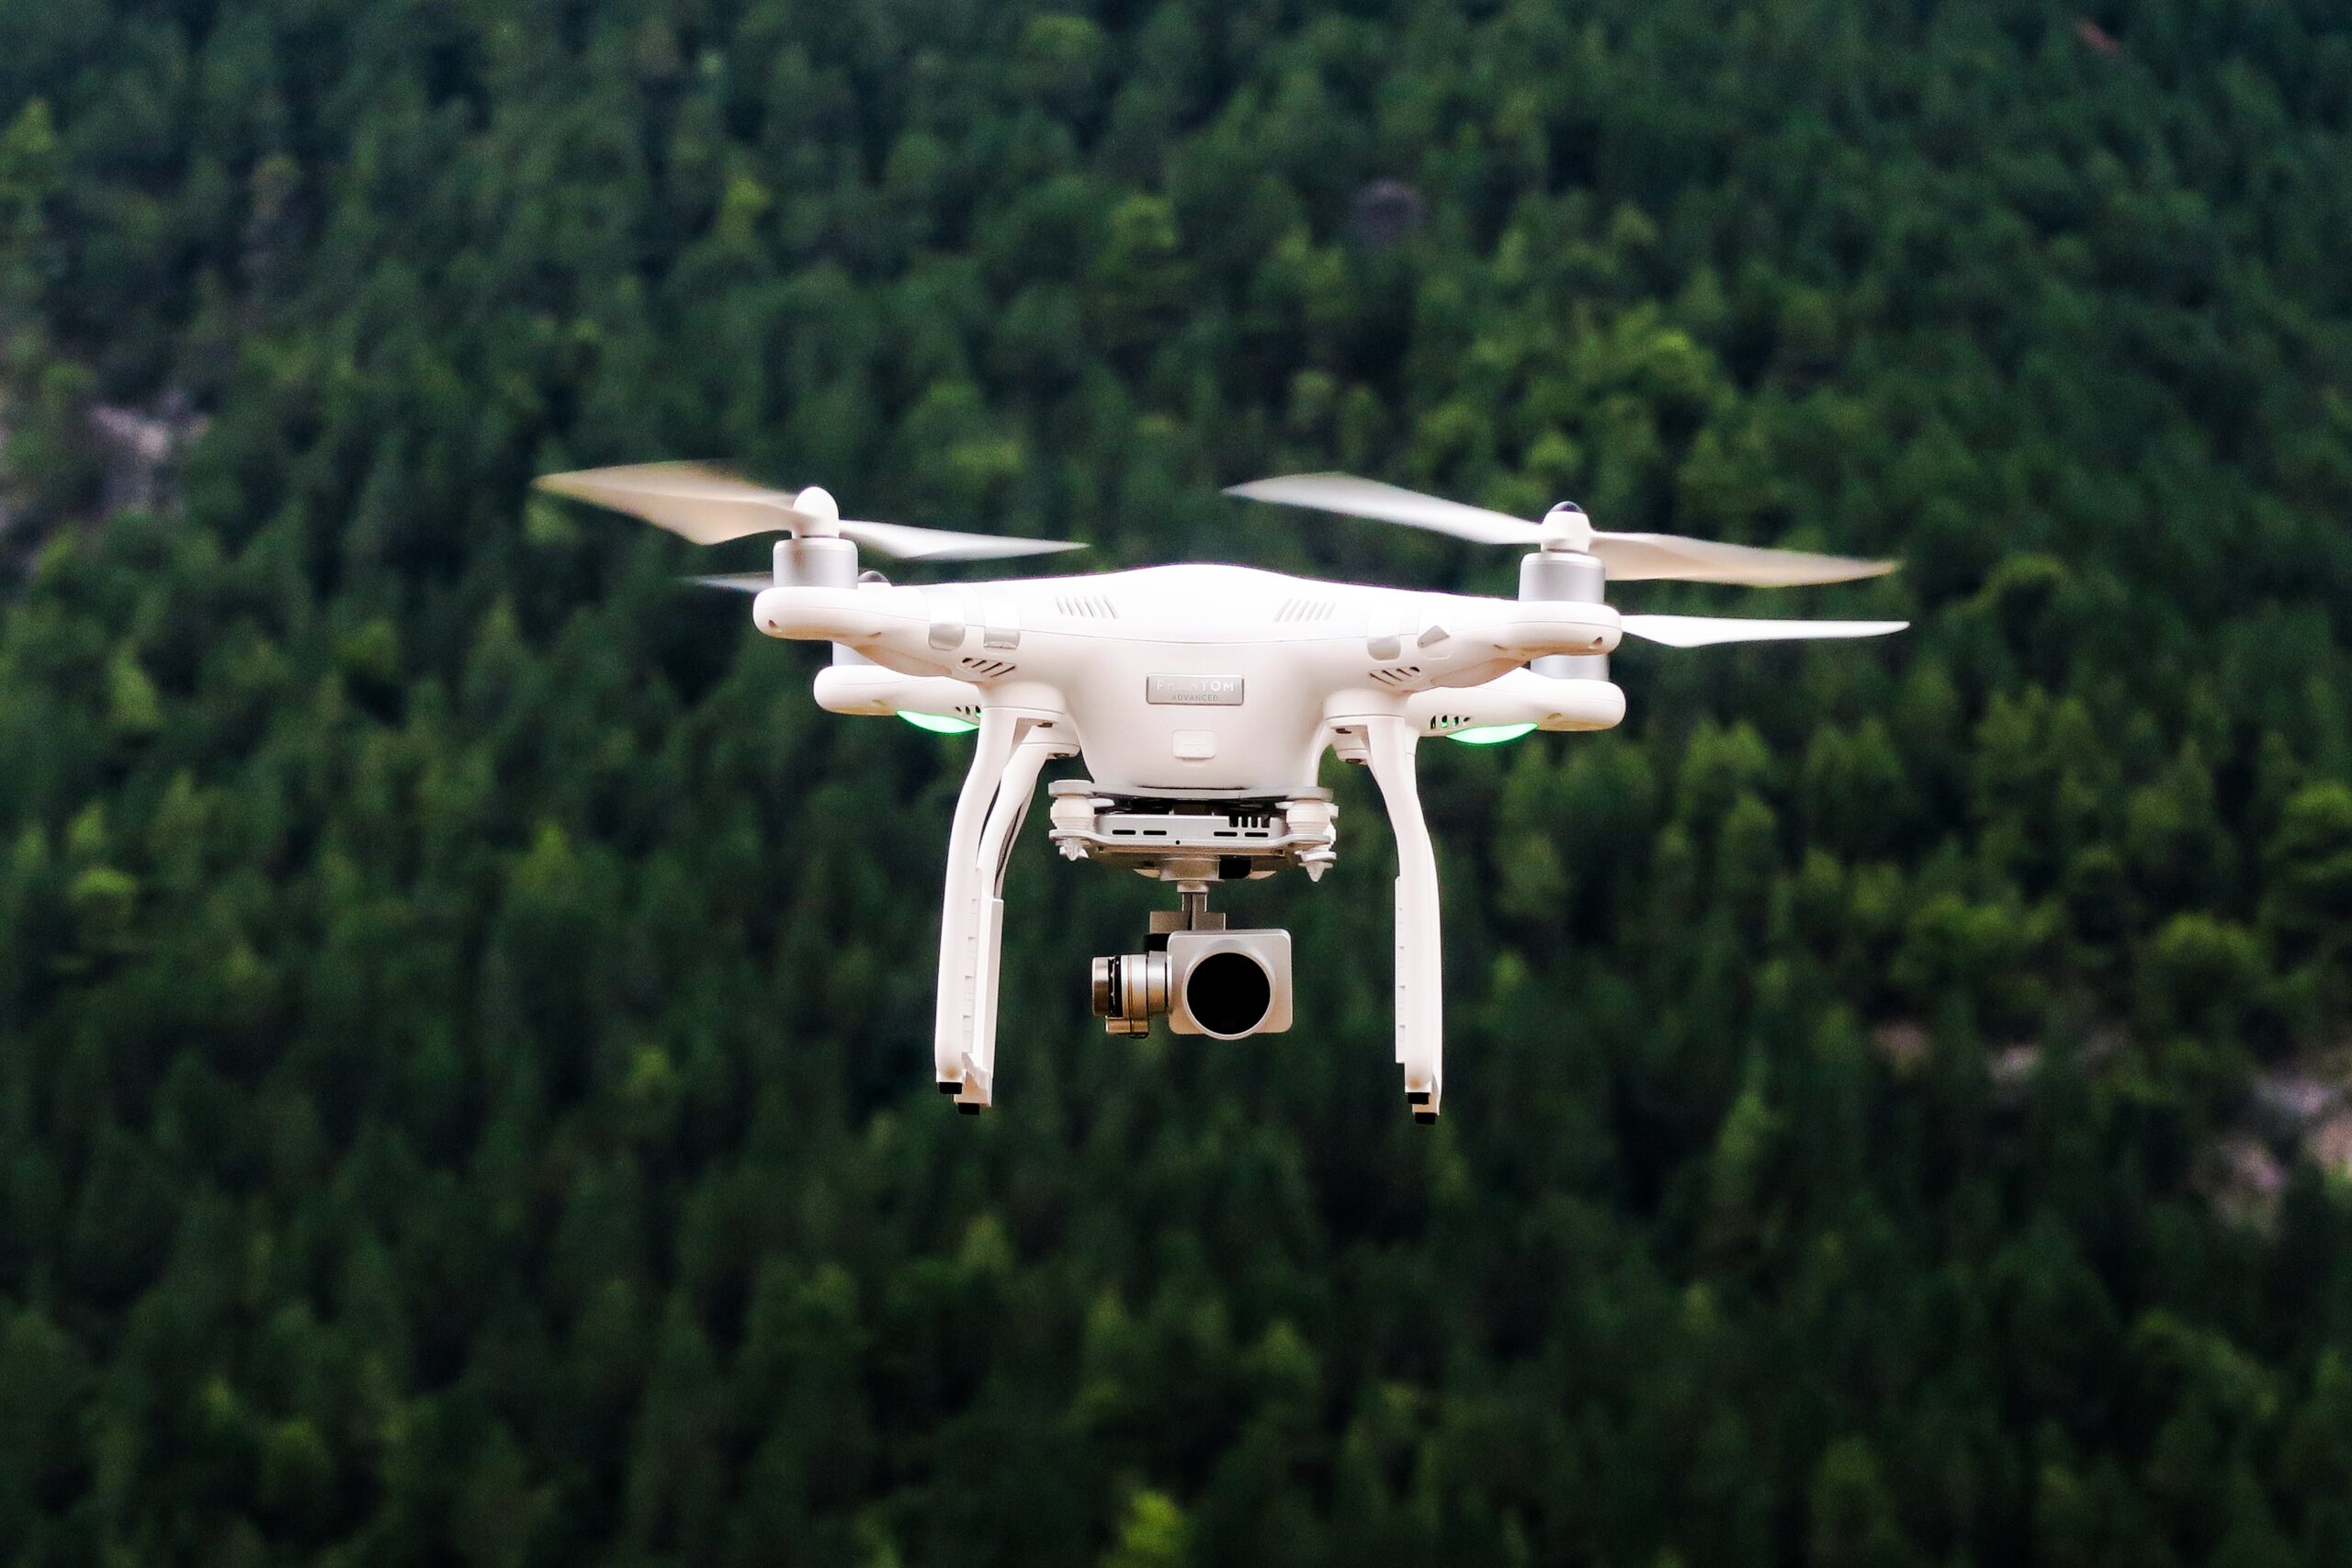 Drone incidents and misuse: legal considerations